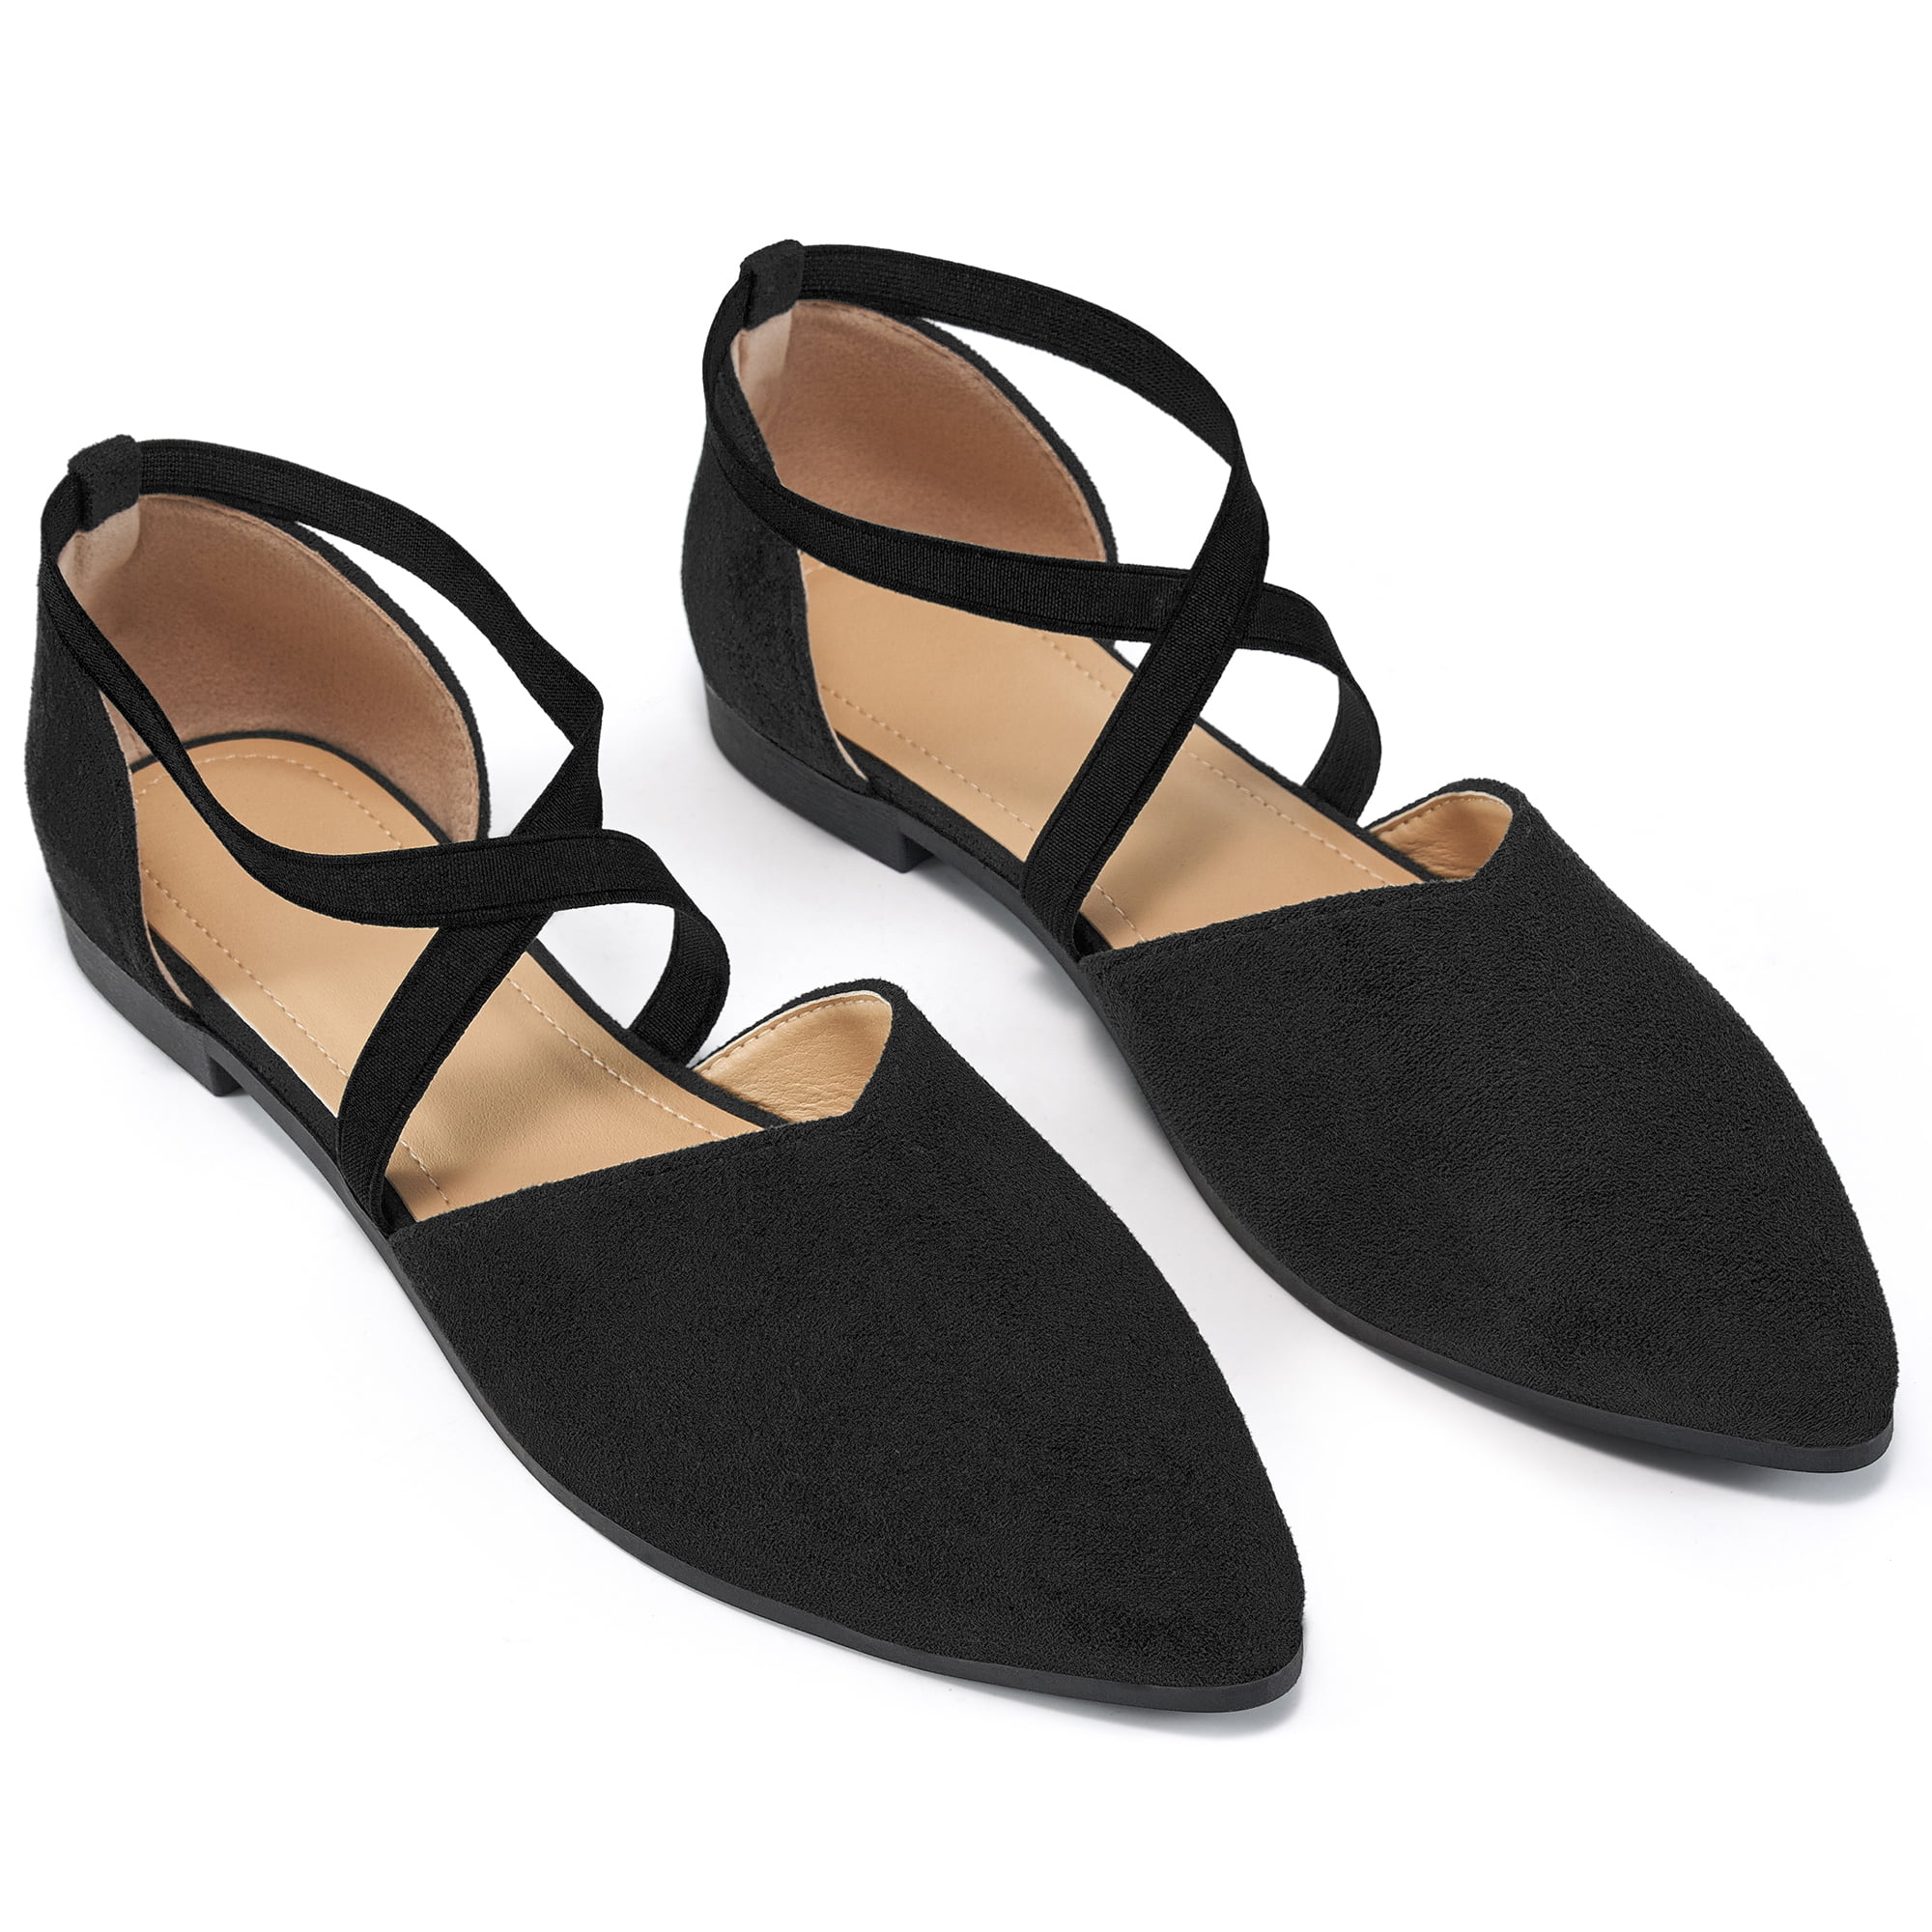 Womens Flats Shoes Fashion Suede Pointed Toe Elastic Ankle Straps ...